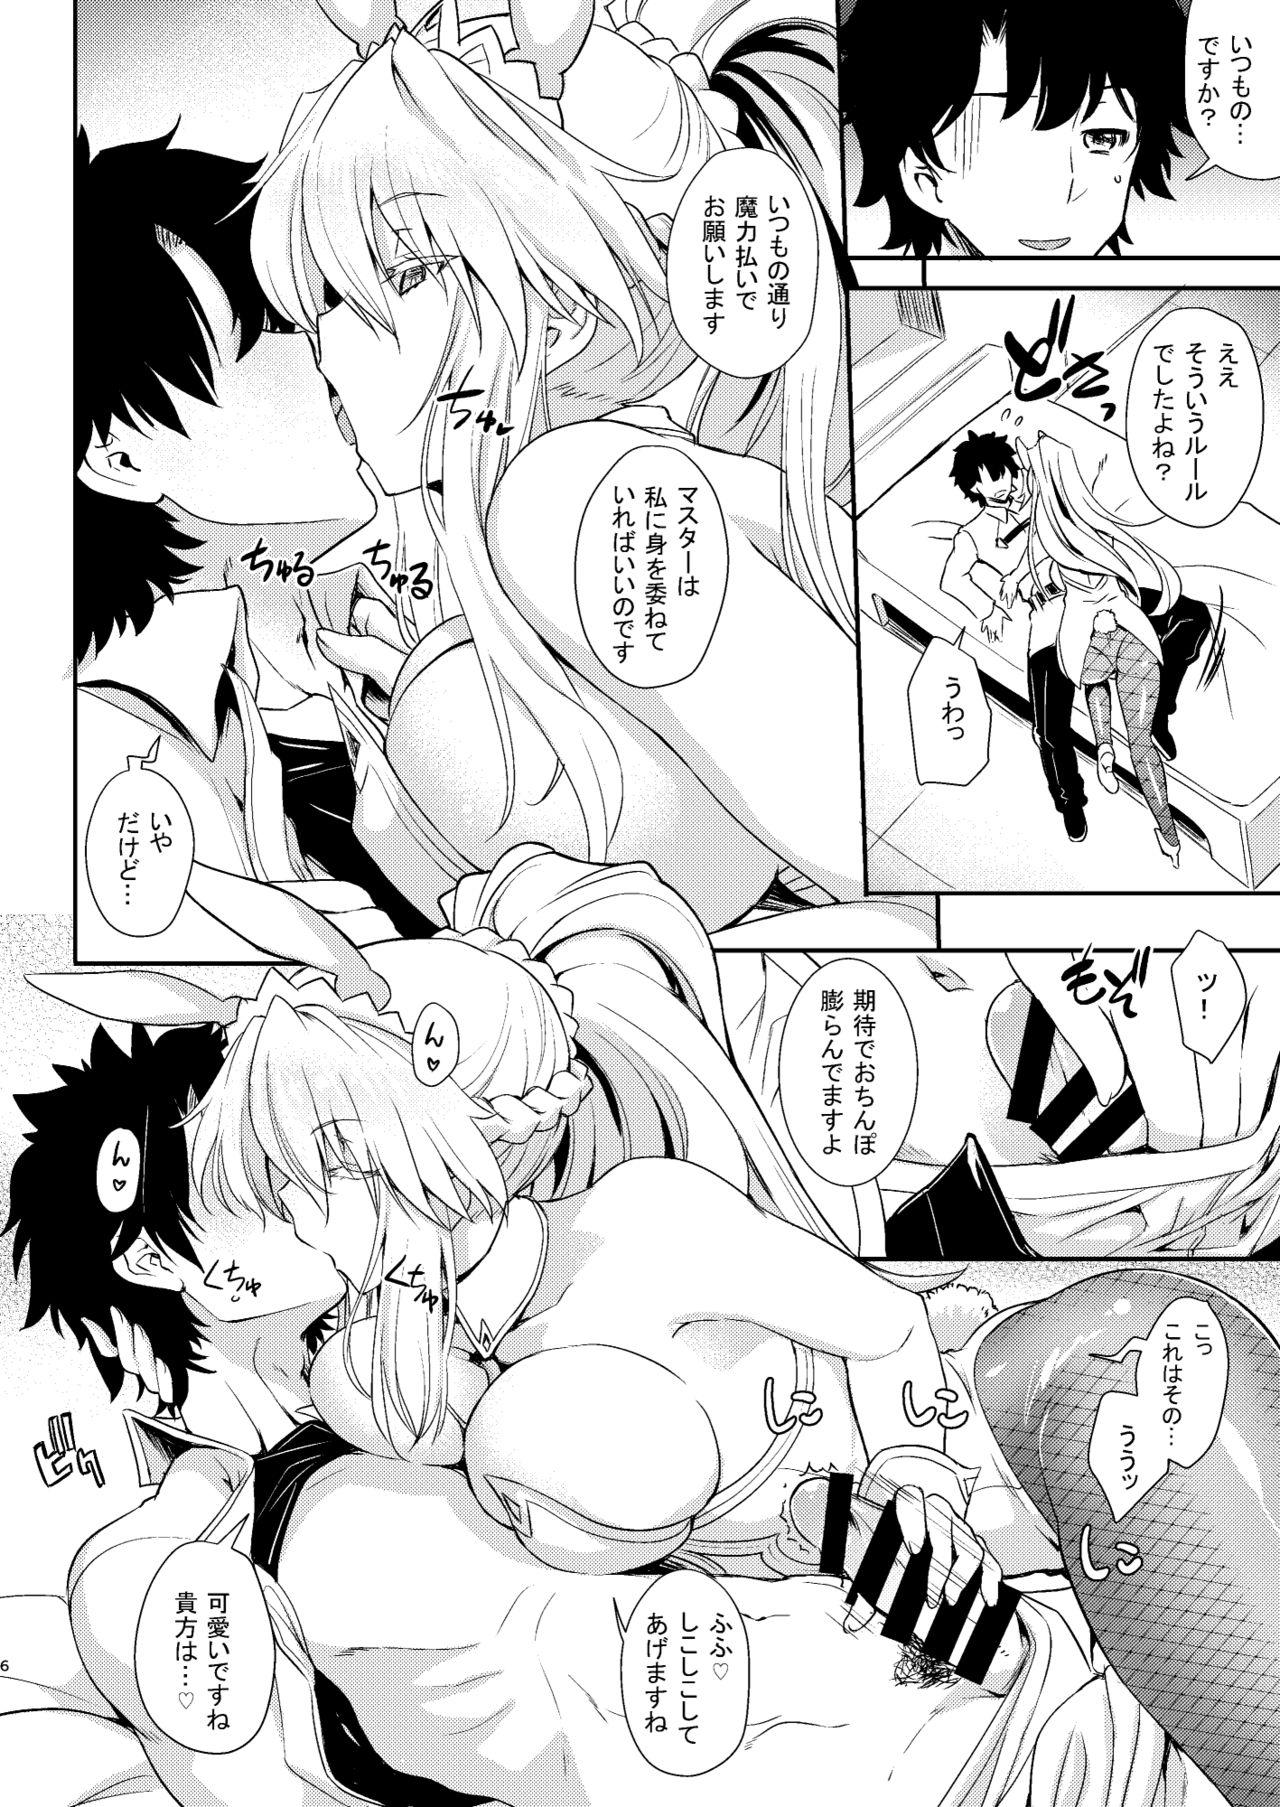 Hot Place your bets please - Fate grand order Sensual - Page 6